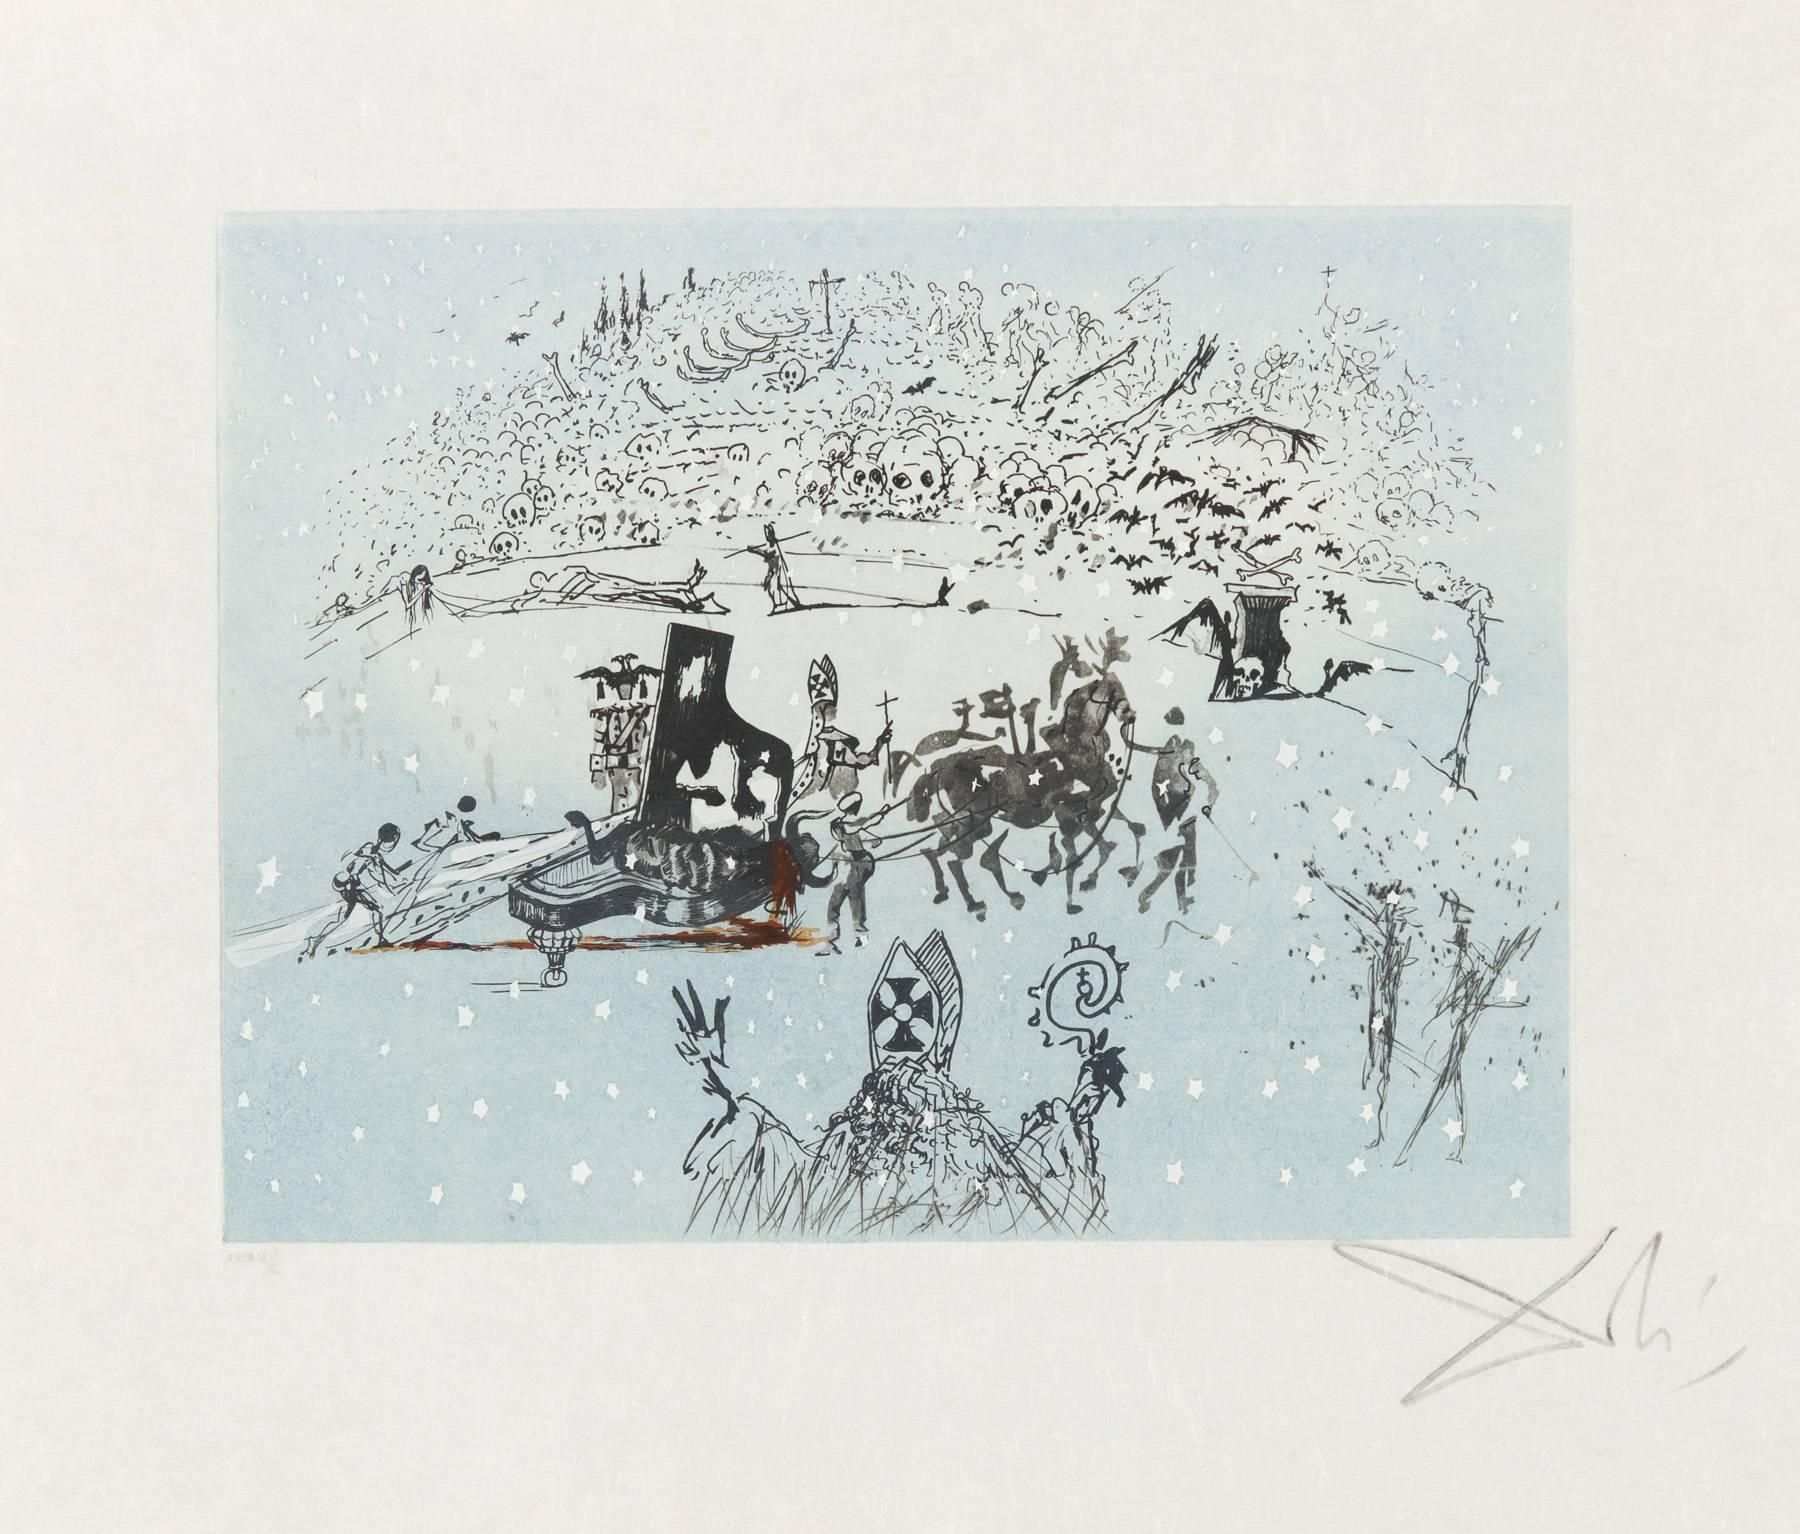 The Piano in the Snow - Print by Salvador Dalí